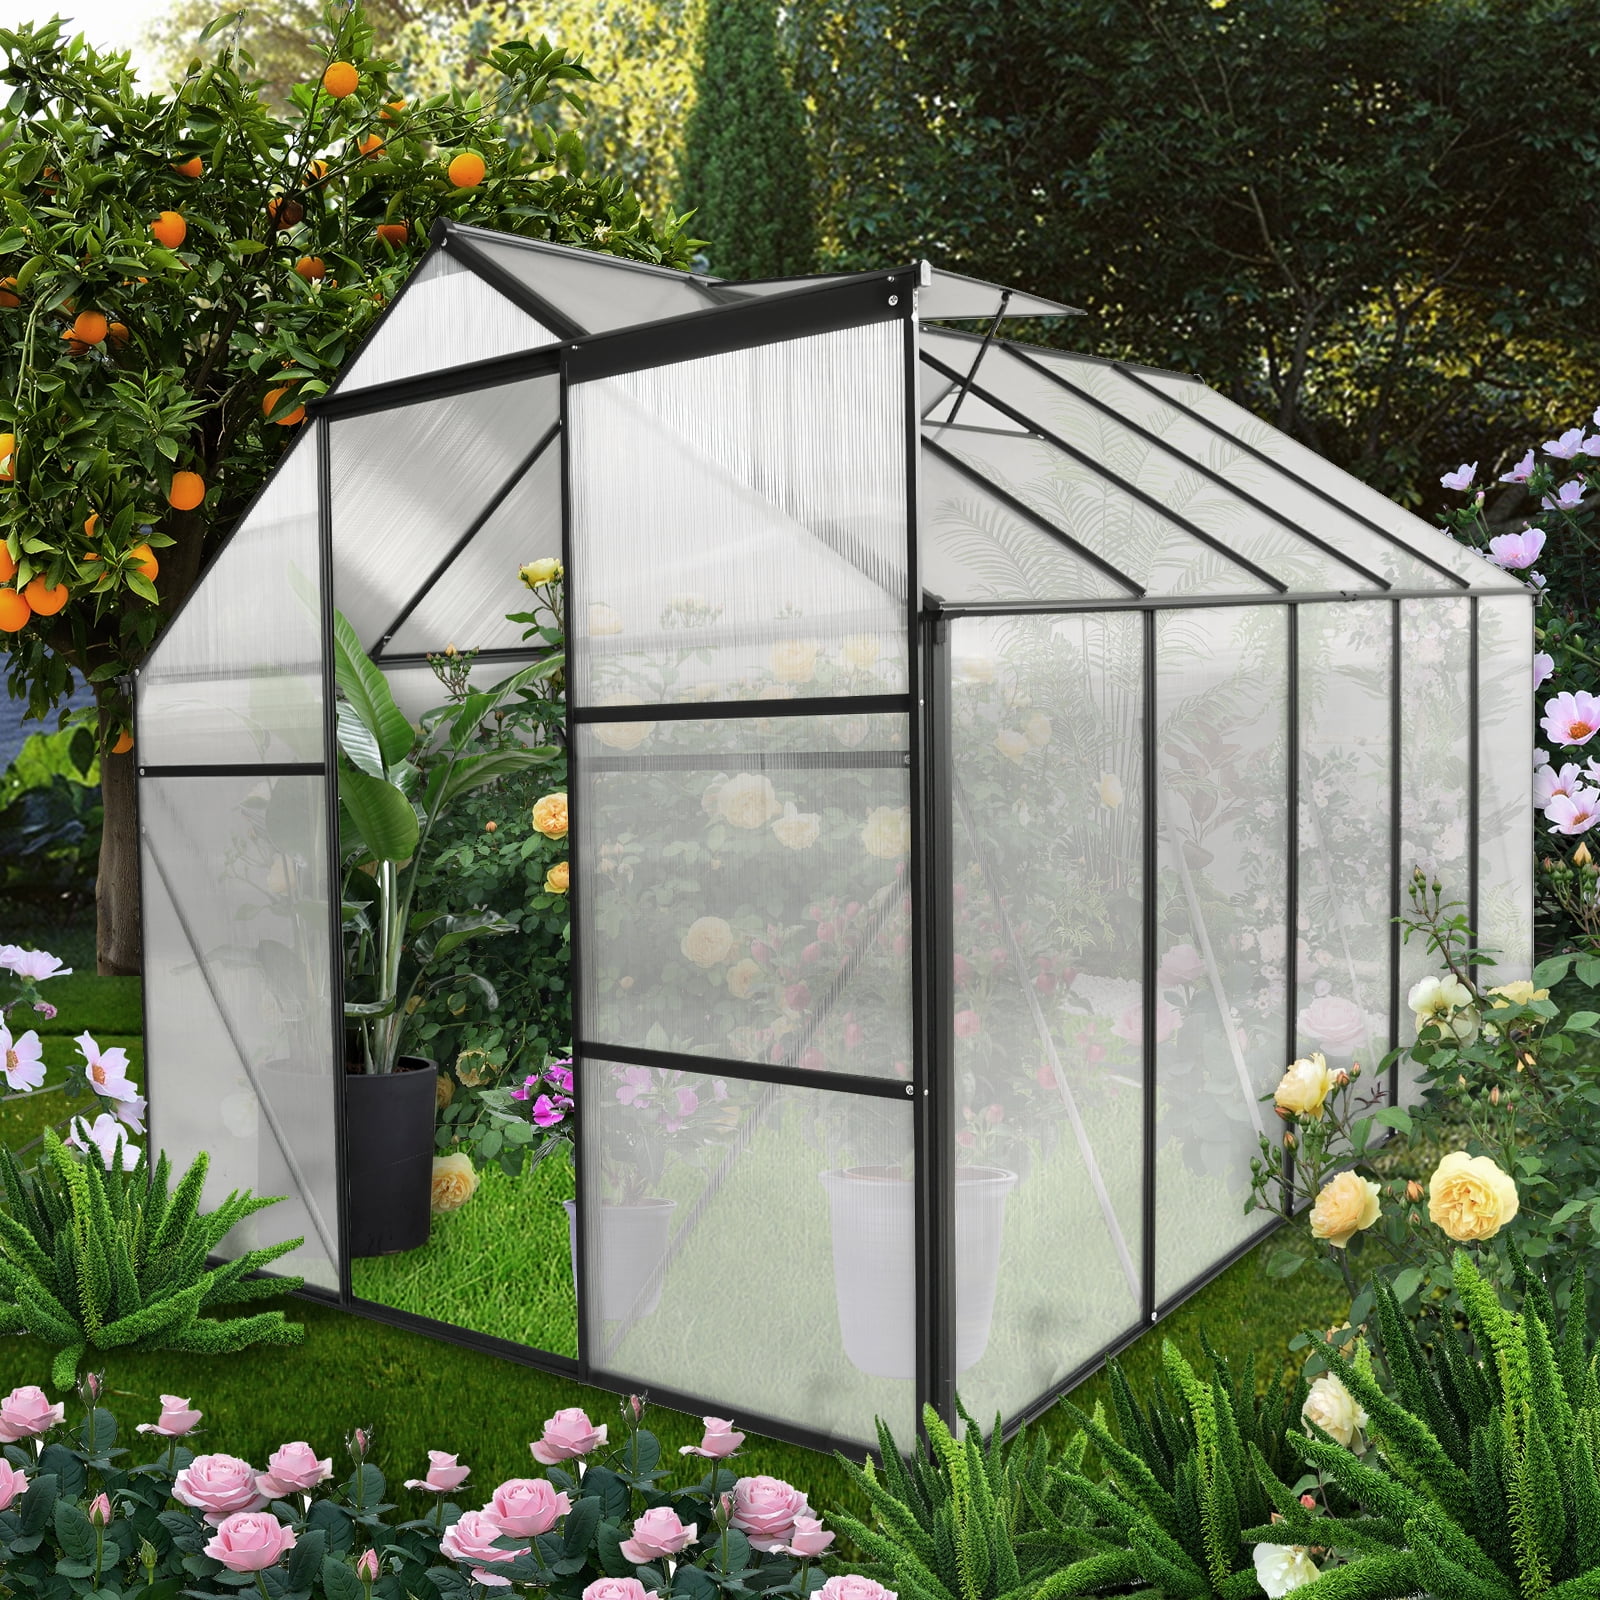 SESSLIFE Greenhouse for Outdoors, 8.3' x 6.2' x 6.3' Aluminum Greenhouse  with Window, Sliding Door, Polycarbonate Greenhouses Garden Supplies for